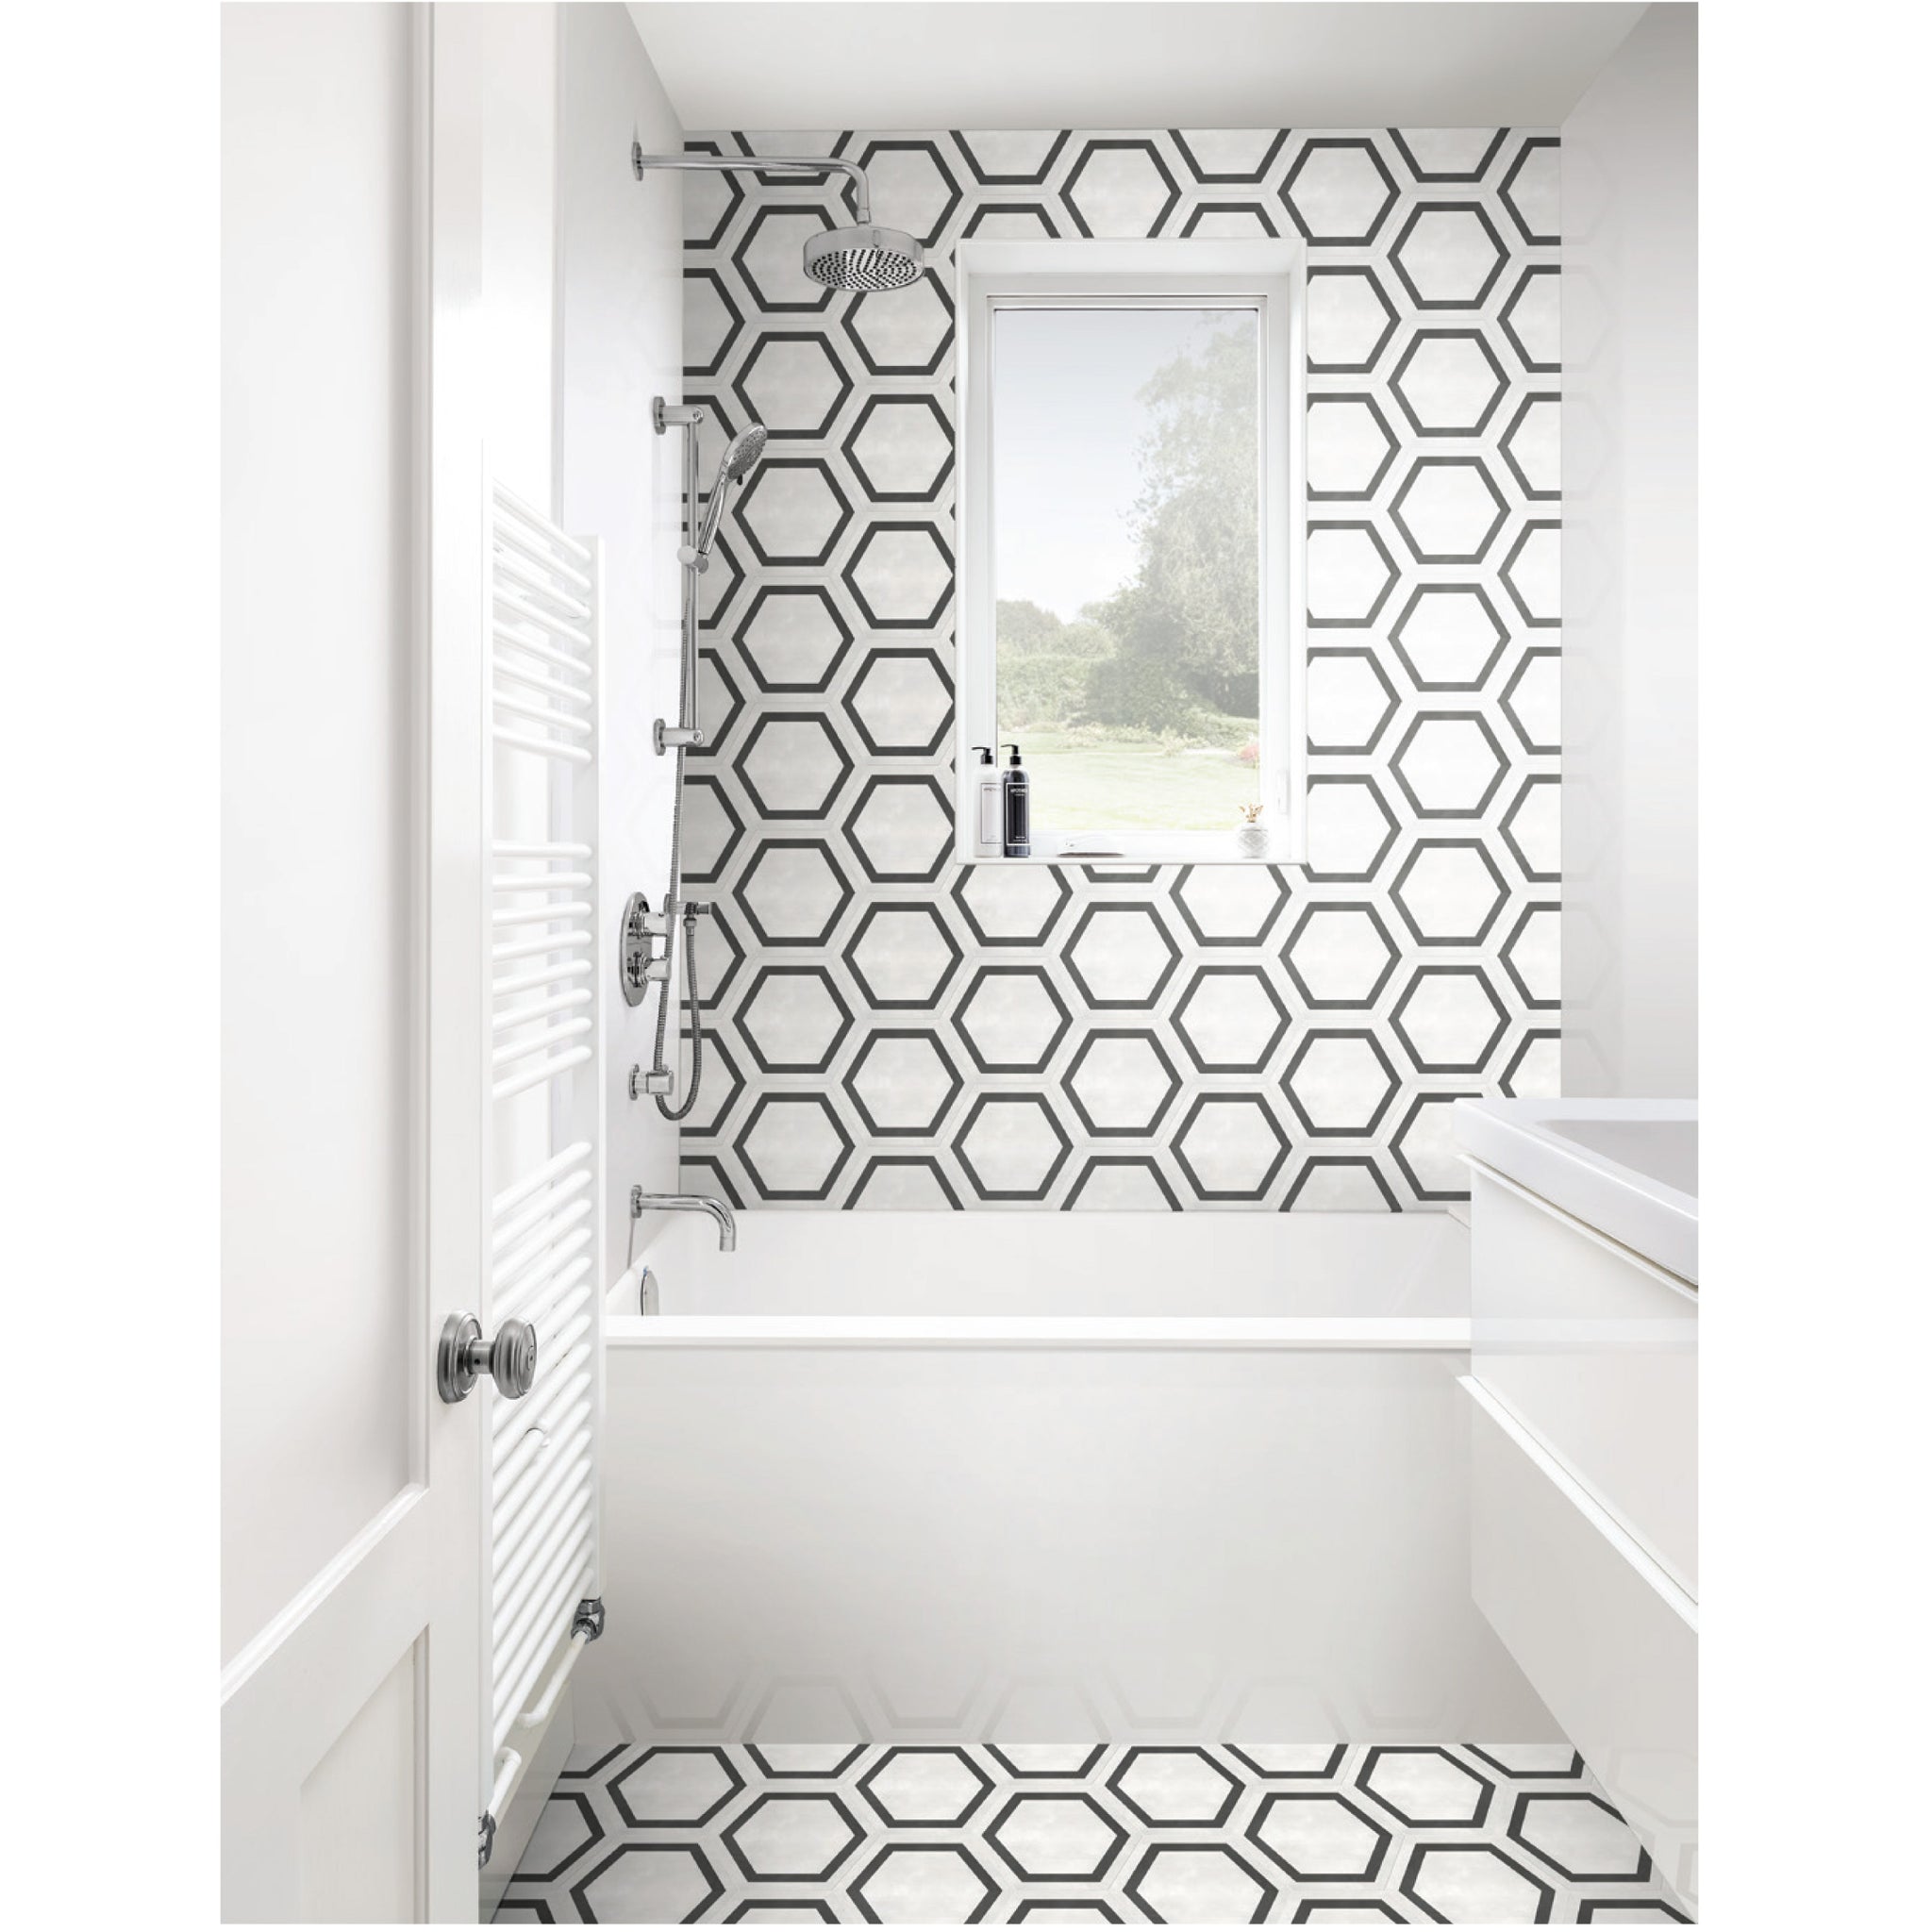 Anatolia-Hex-Frame-Field-Tile-60-405-Ivory-Installed_2048x